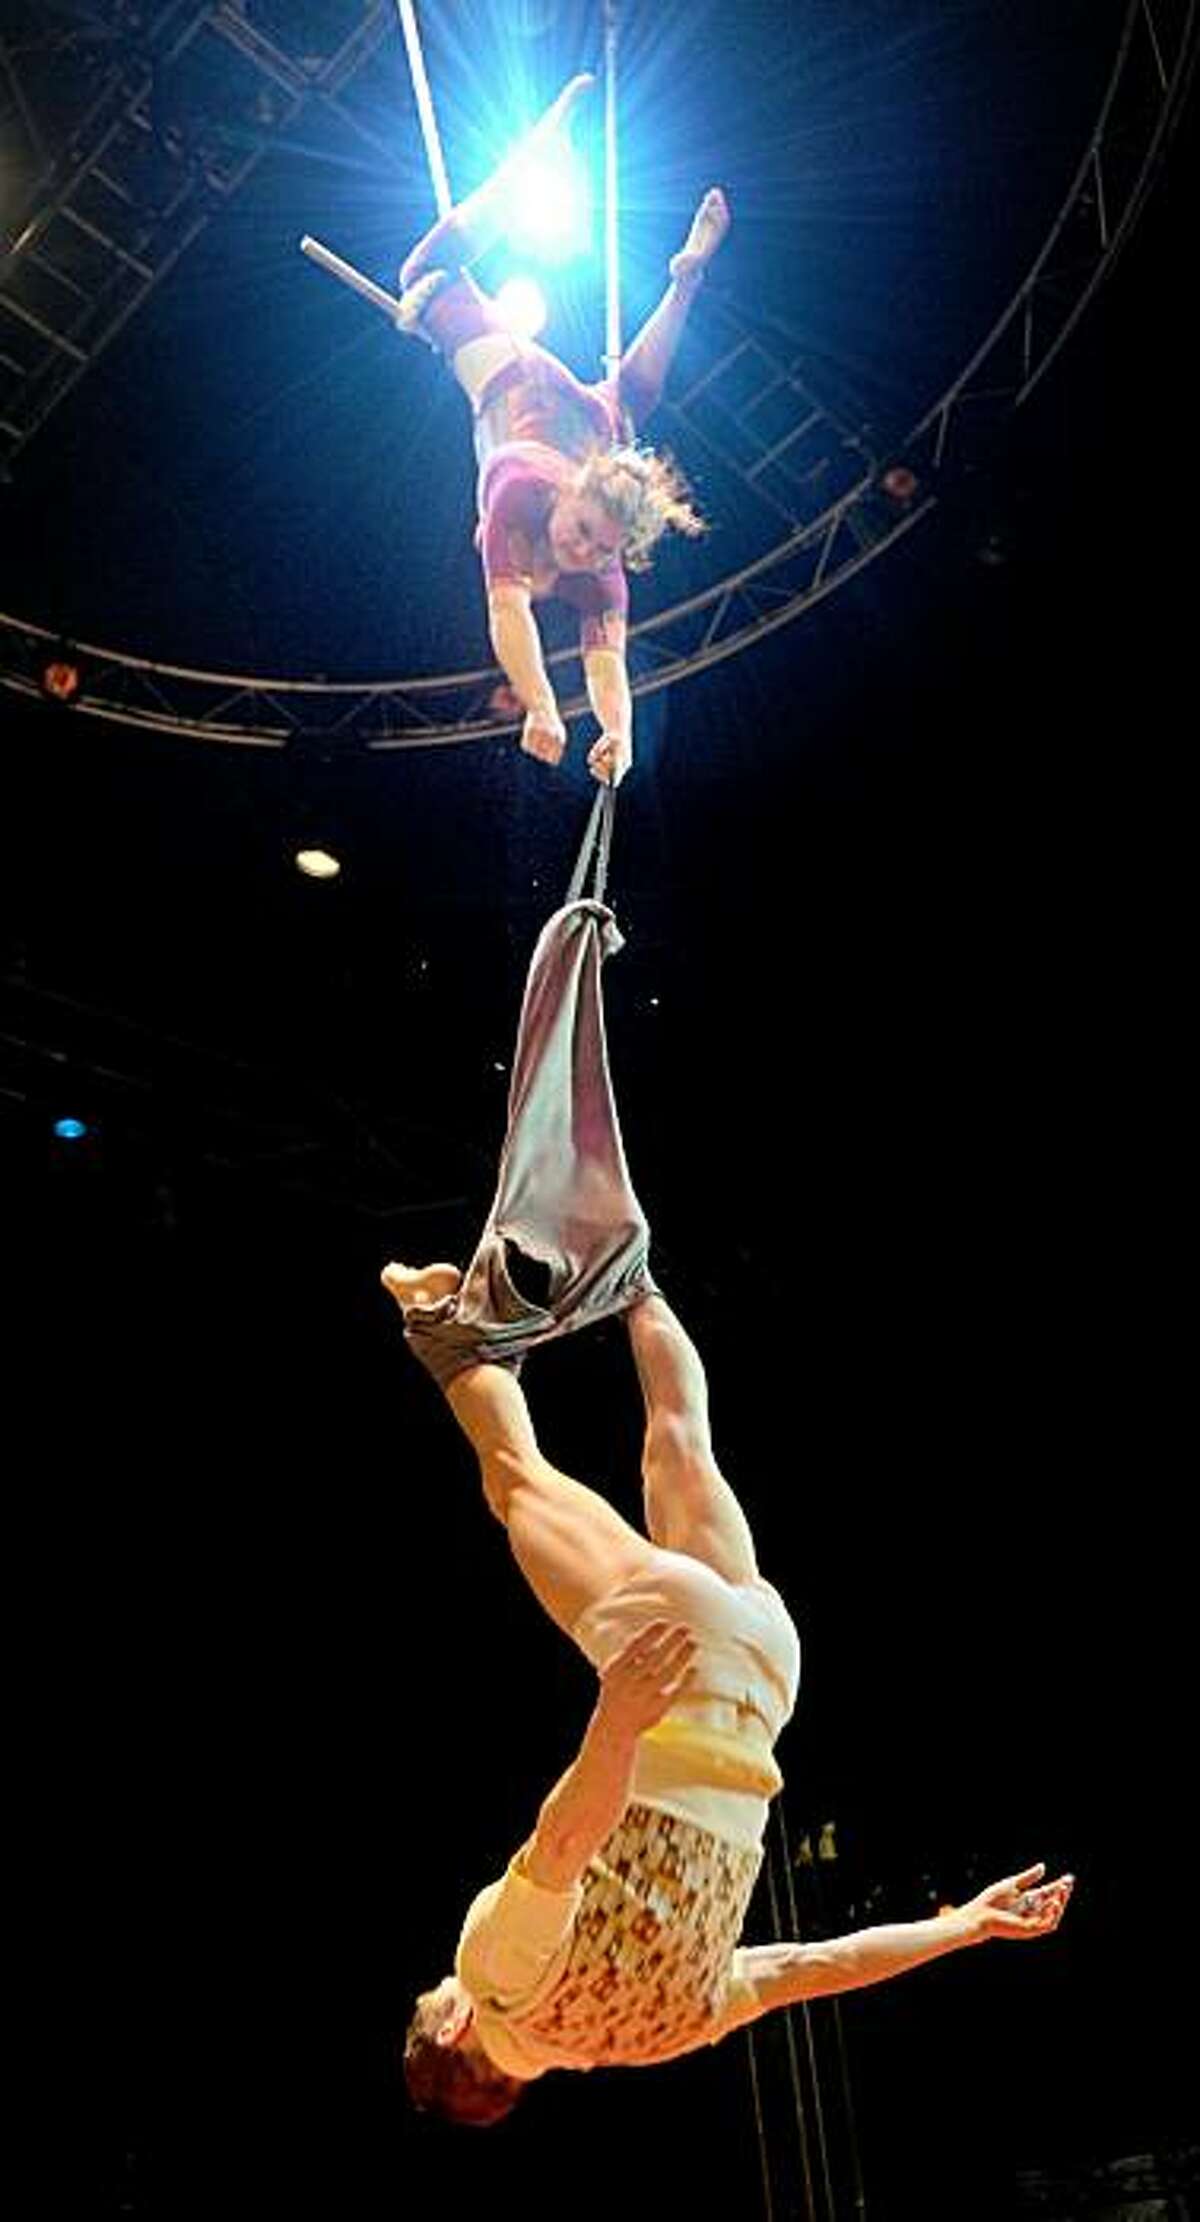 Two acrobats of Australia’s internationally acclaimed circus company, Circus Oz, perform their trapeze act during a rehearsal of their new production in the lead up to the opening night, in Melbourne on June 16, 2010. One of the very first 'new' or 'contemporary' circuses without animals, it predates most other nouveau cirque troupes and predates Cirque du Soleil by about six years. Circus Oz has performed in 26 different countries, across five continents to over two million people. They have broken box office records at the Edinburgh Fringe Festival and represented Australia at scores of international festivals.